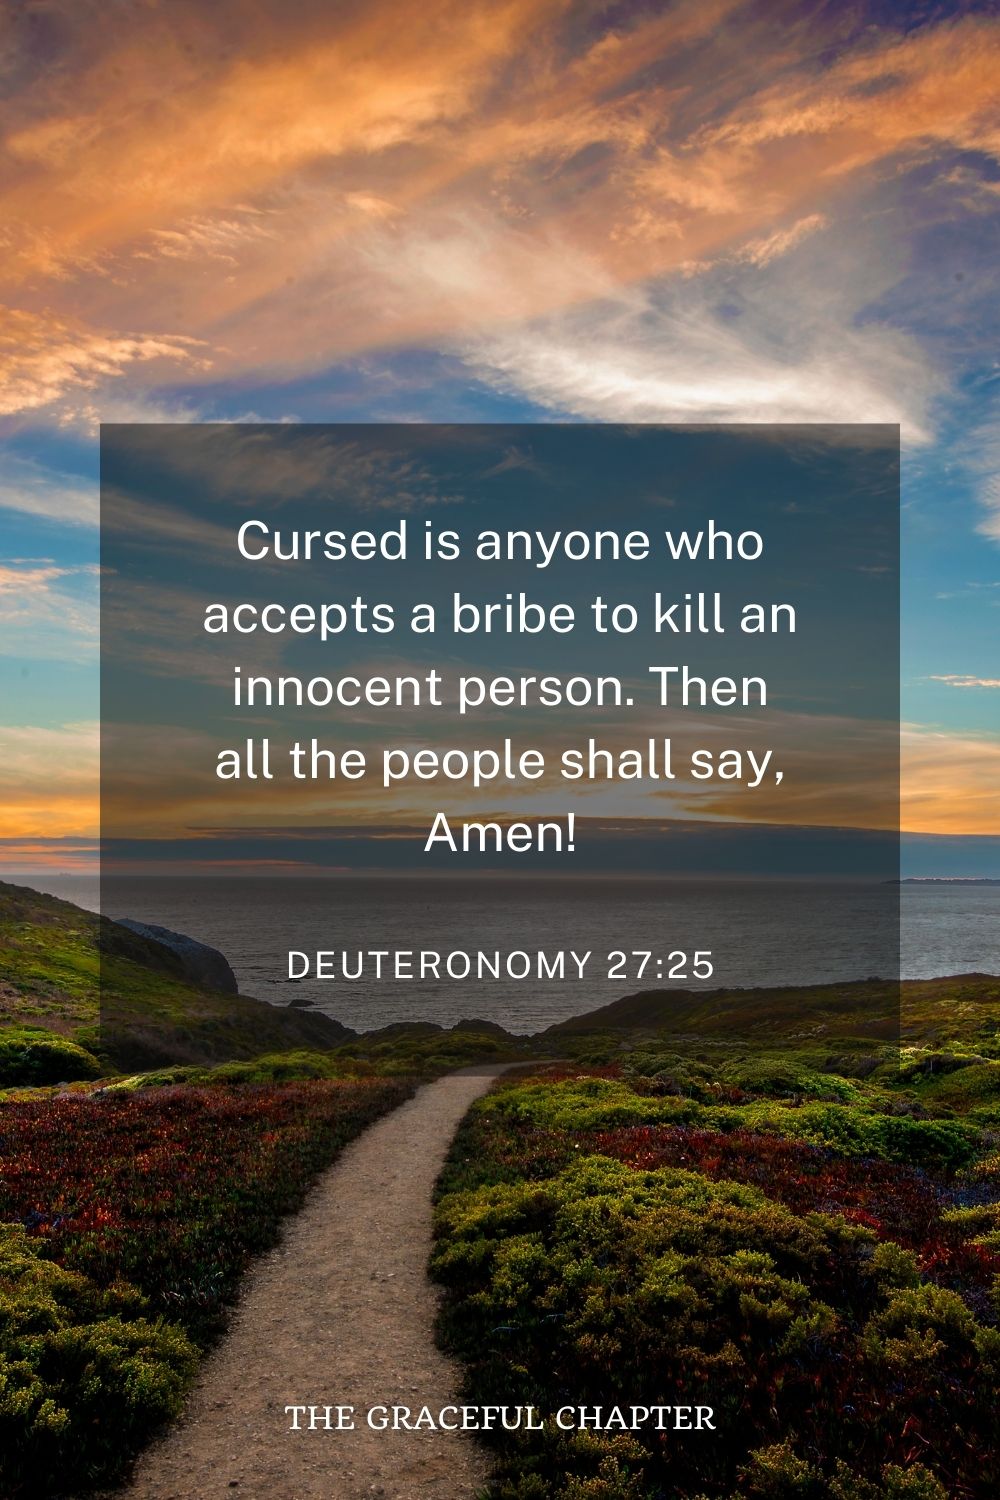 Cursed is anyone who accepts a bribe to kill an innocent person. Then all the people shall say, Amen! Deuteronomy 27:25